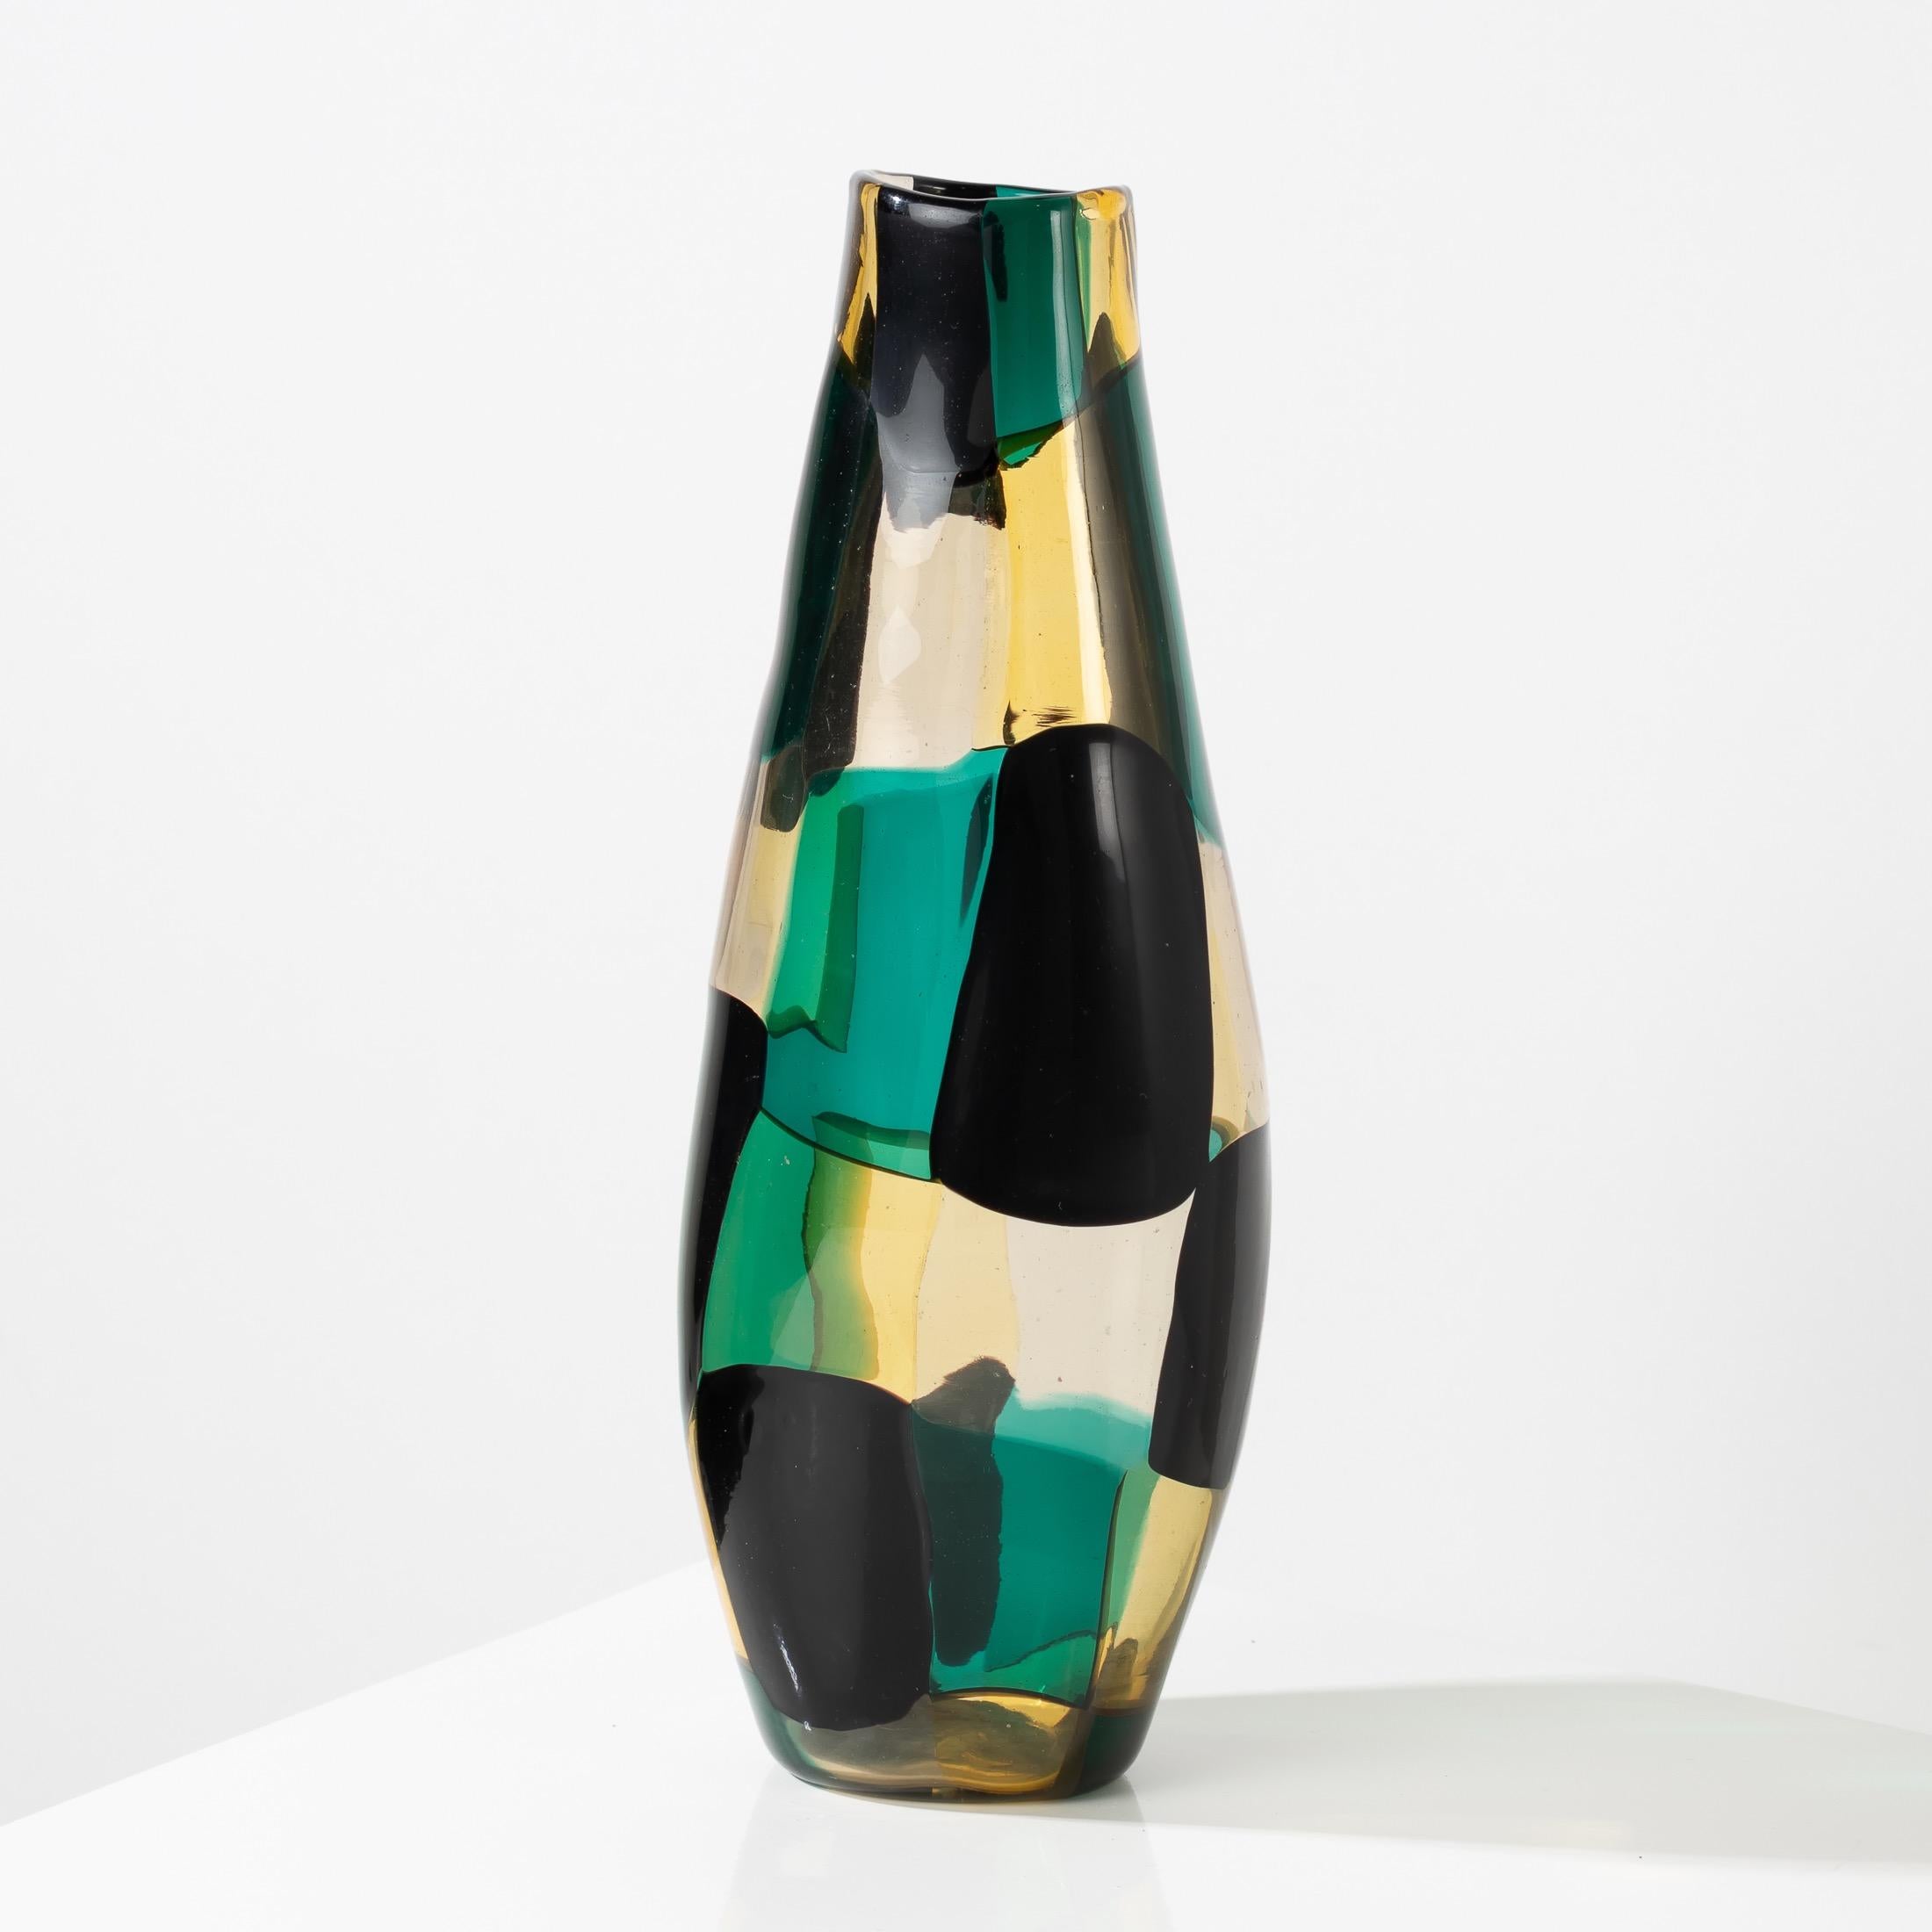 About this vase from the 